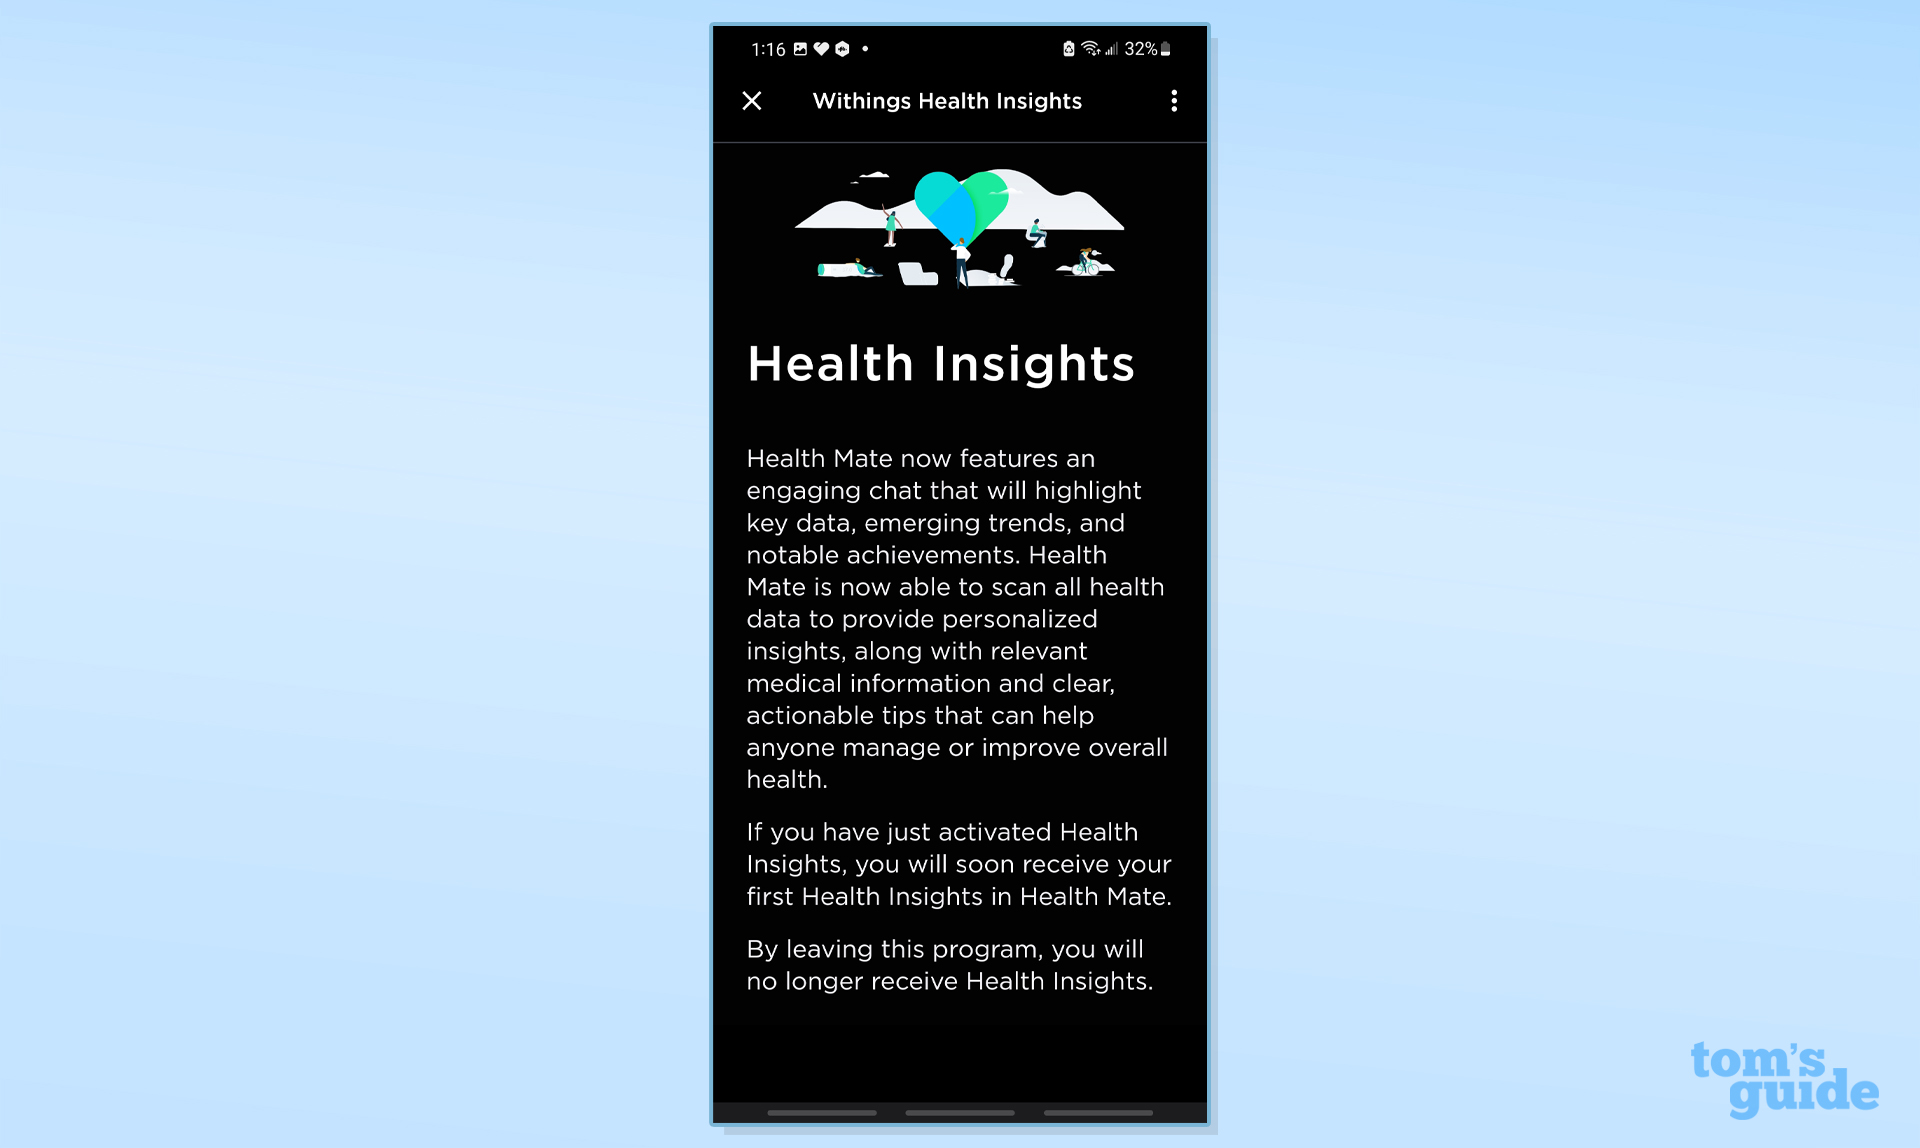 Withings Body Cardio Smart Scale app insights